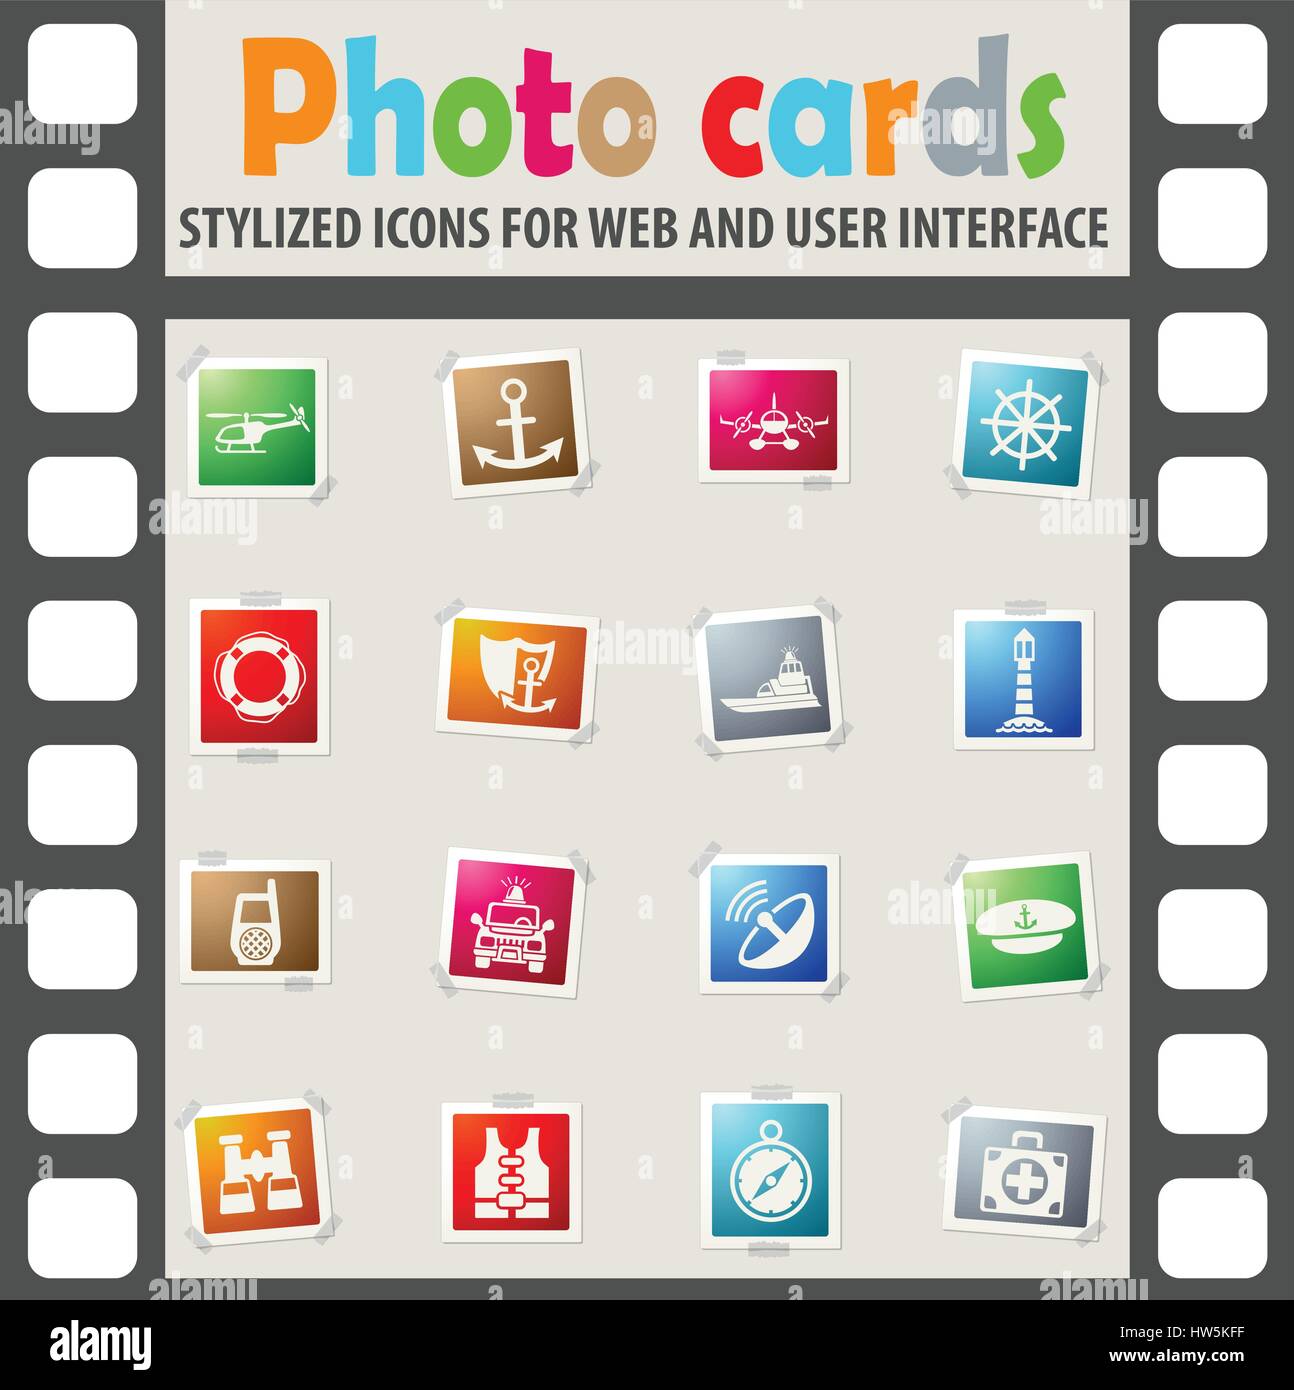 coastguard web icons on color photo cards for user interface Stock Vector